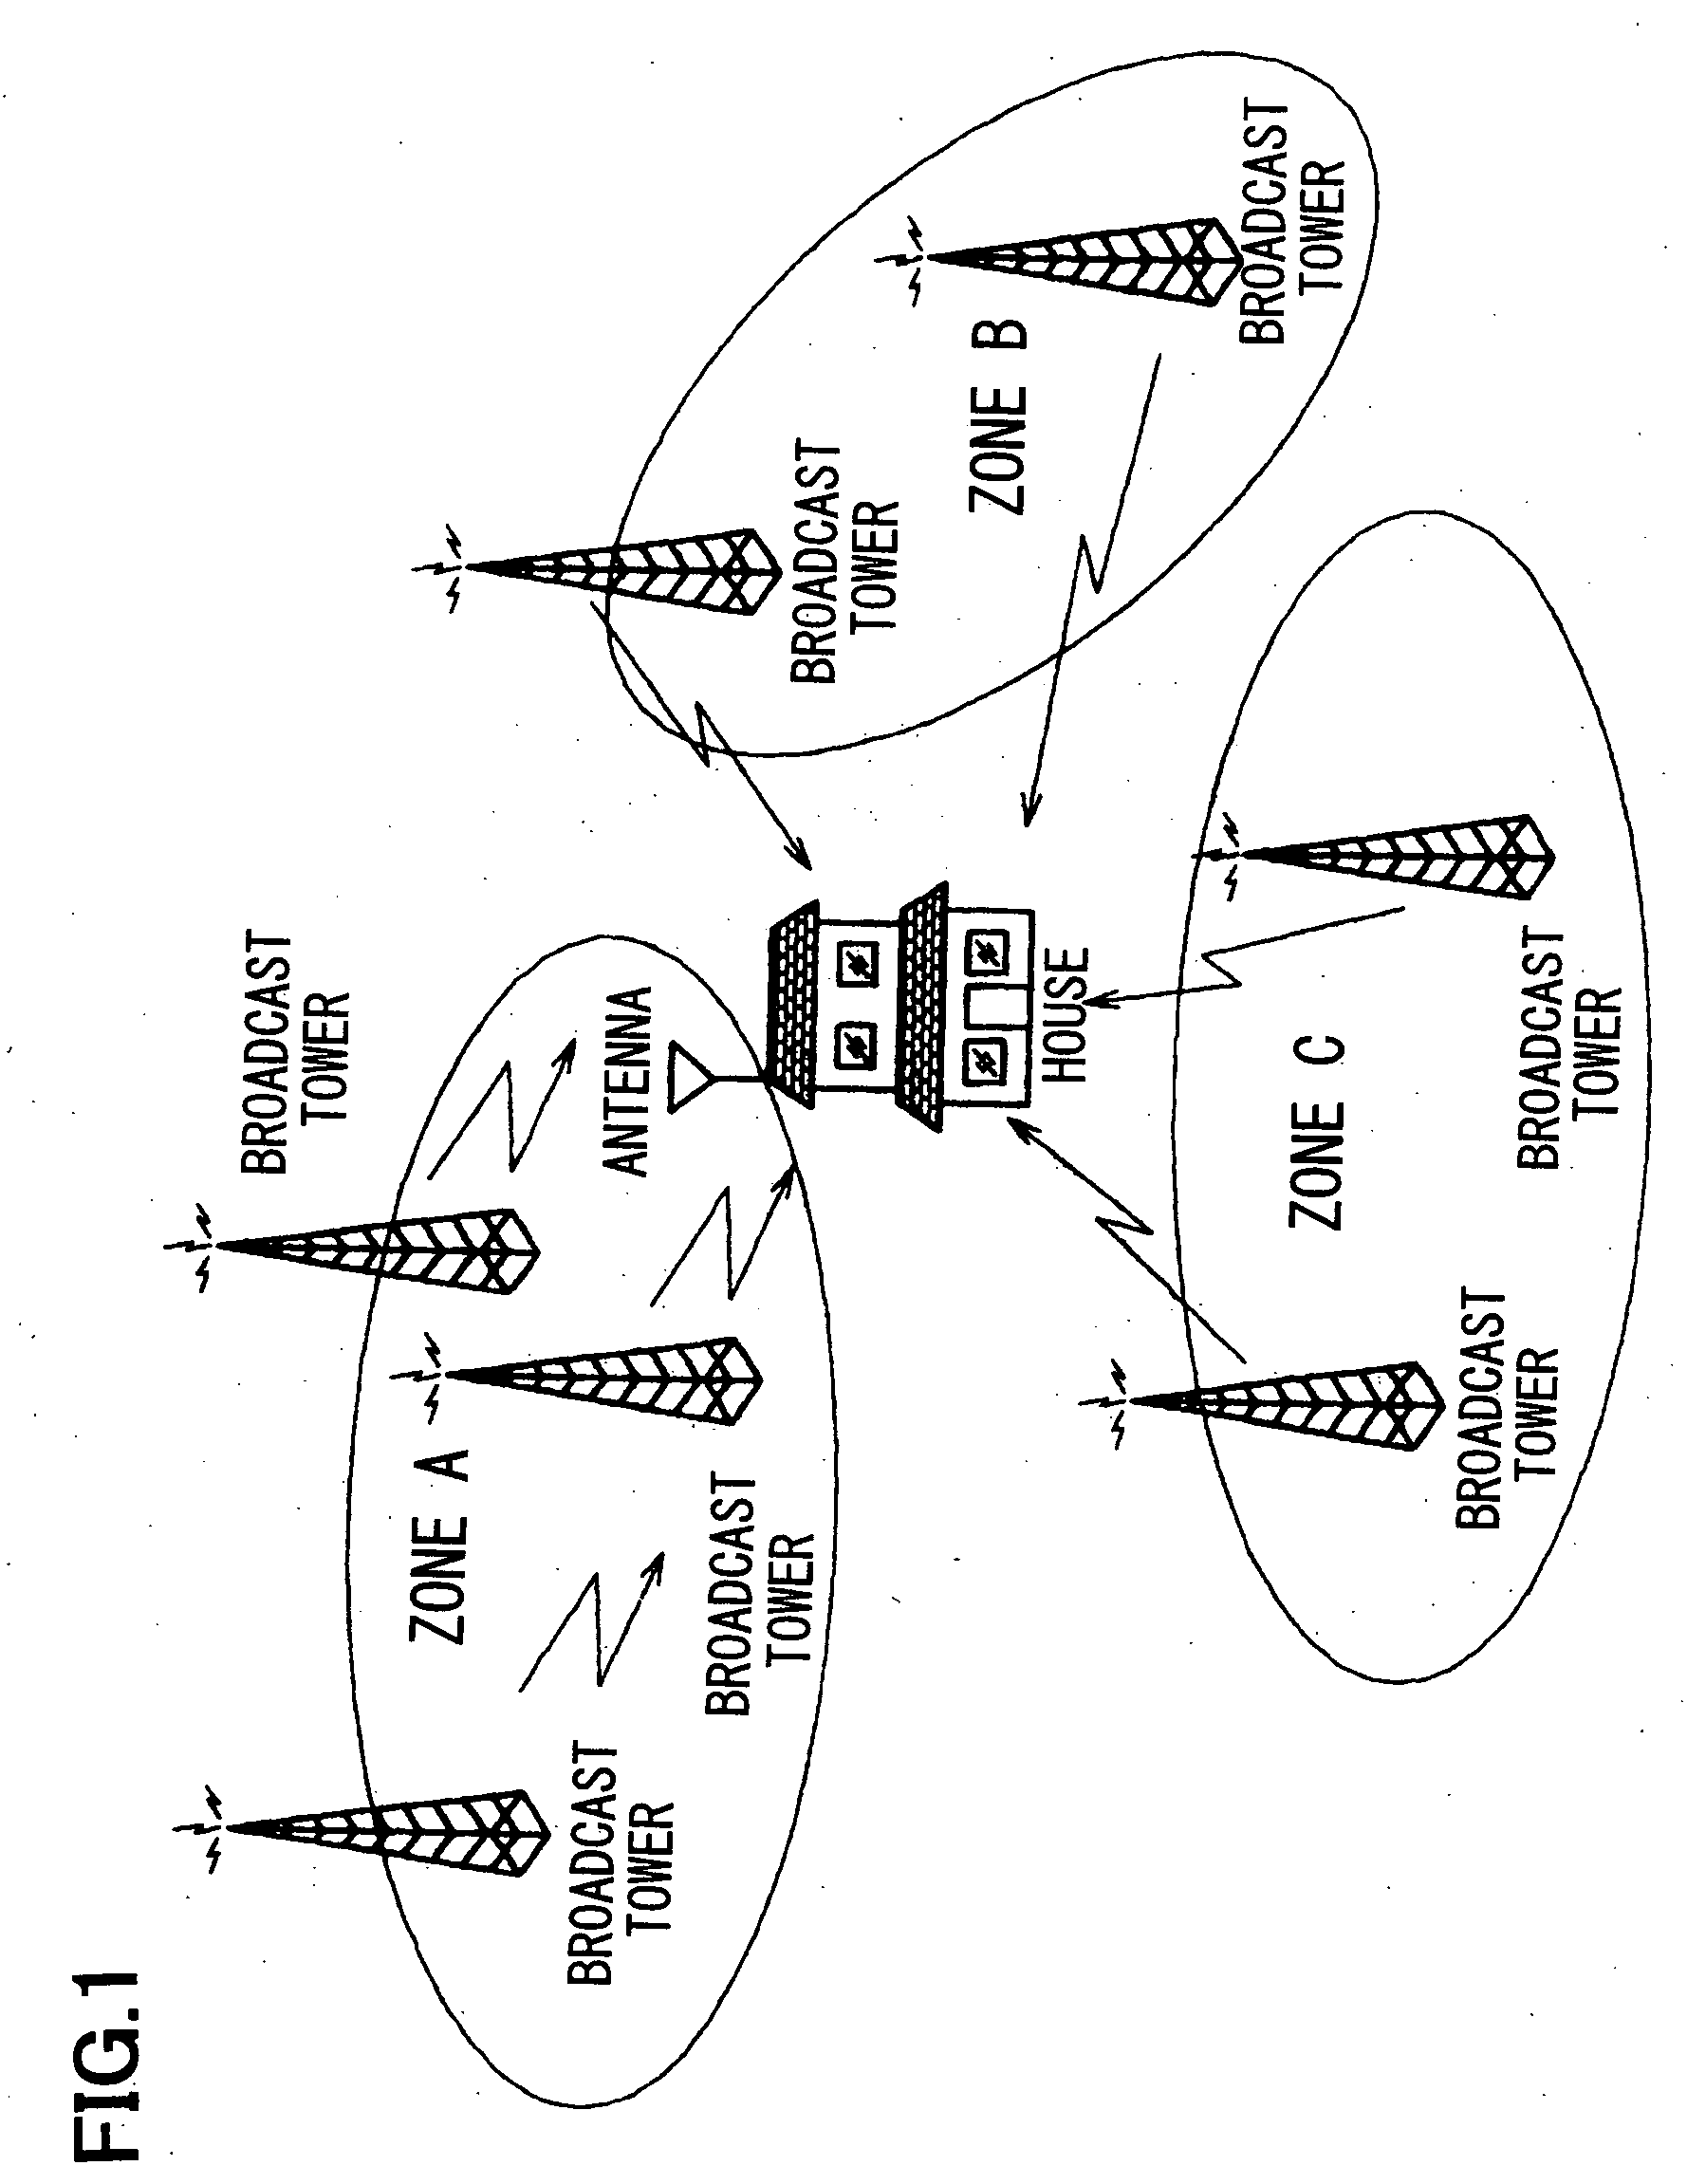 Analog television broadcast signal receiver